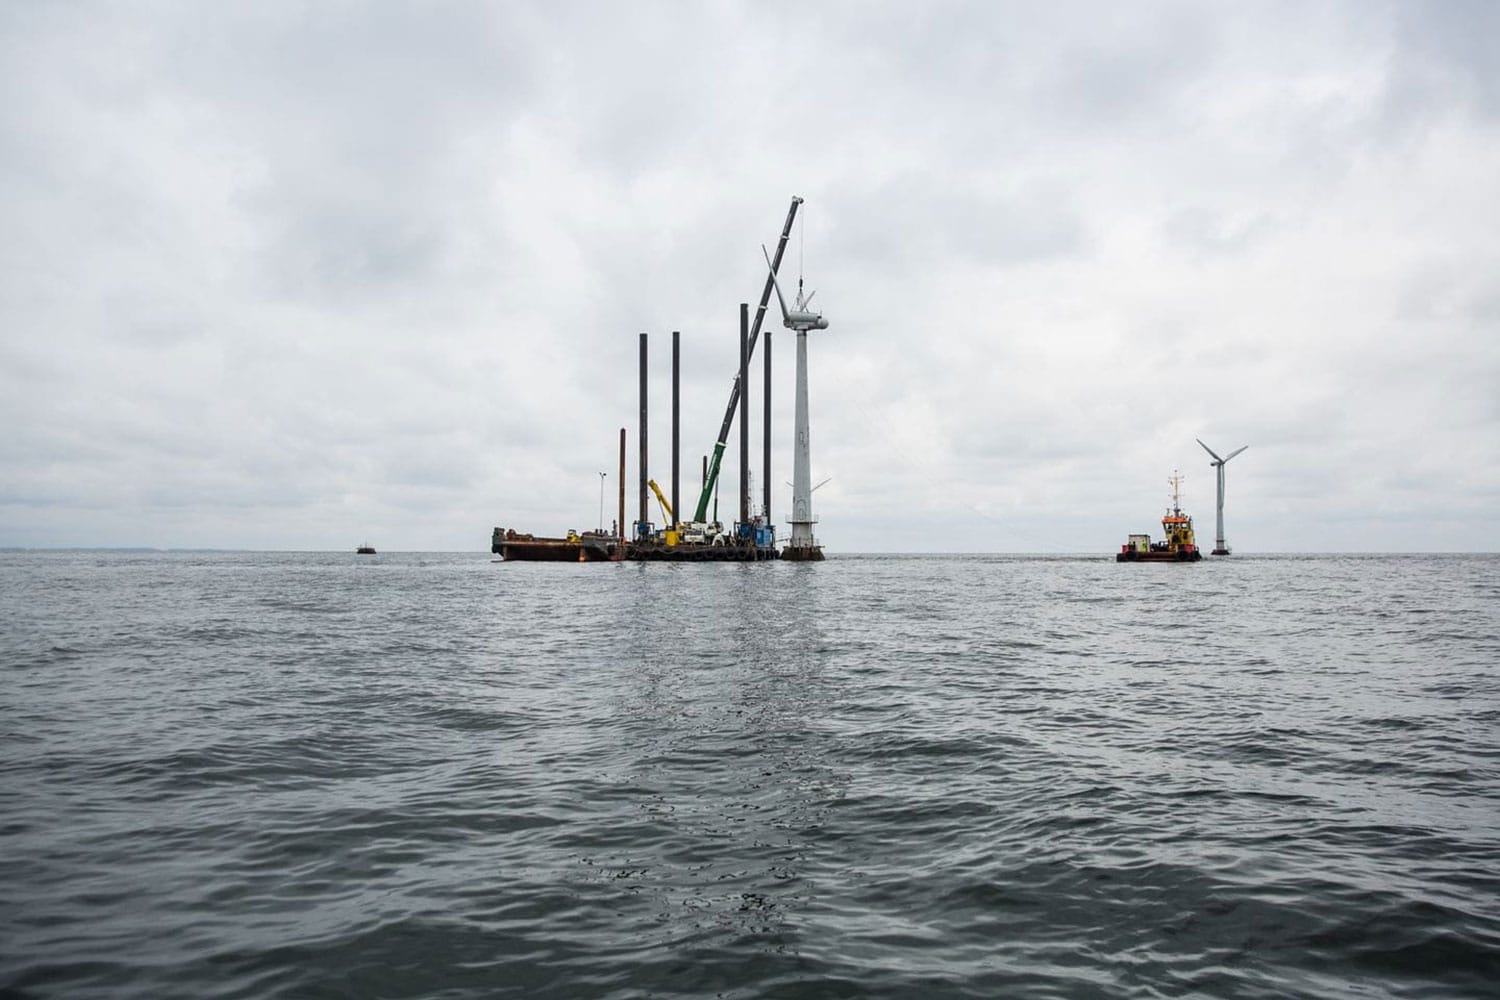 Energy giant Ørsted to recover, reuse or recycle wind turbine blades